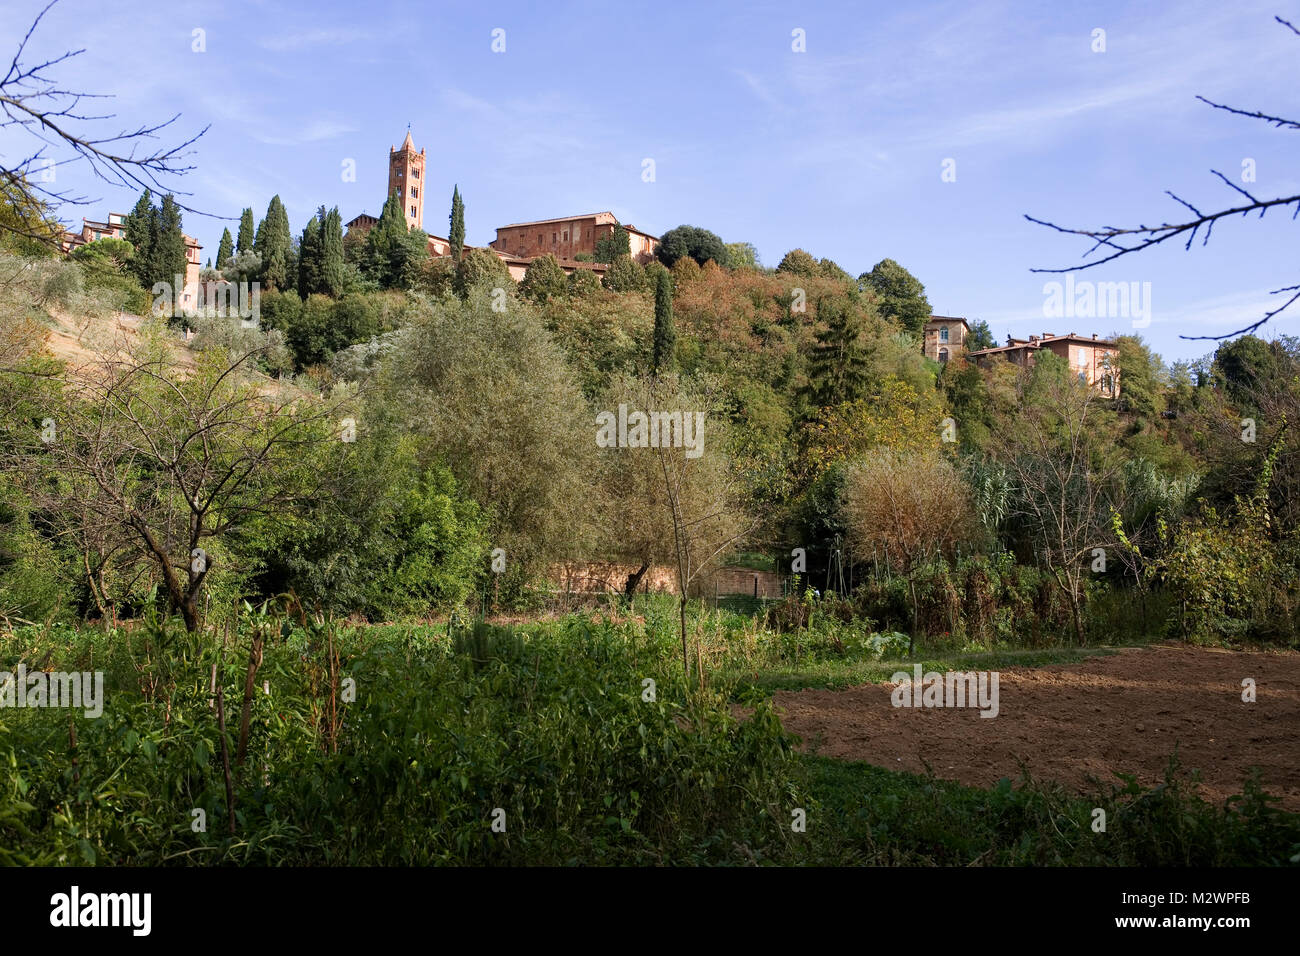 The tower of Santa Maria dei Servi in Valdimontone, from the Orto de'Pecci, a lovely area of working gardens in the heart of Siena, Tuscany, Italy Stock Photo